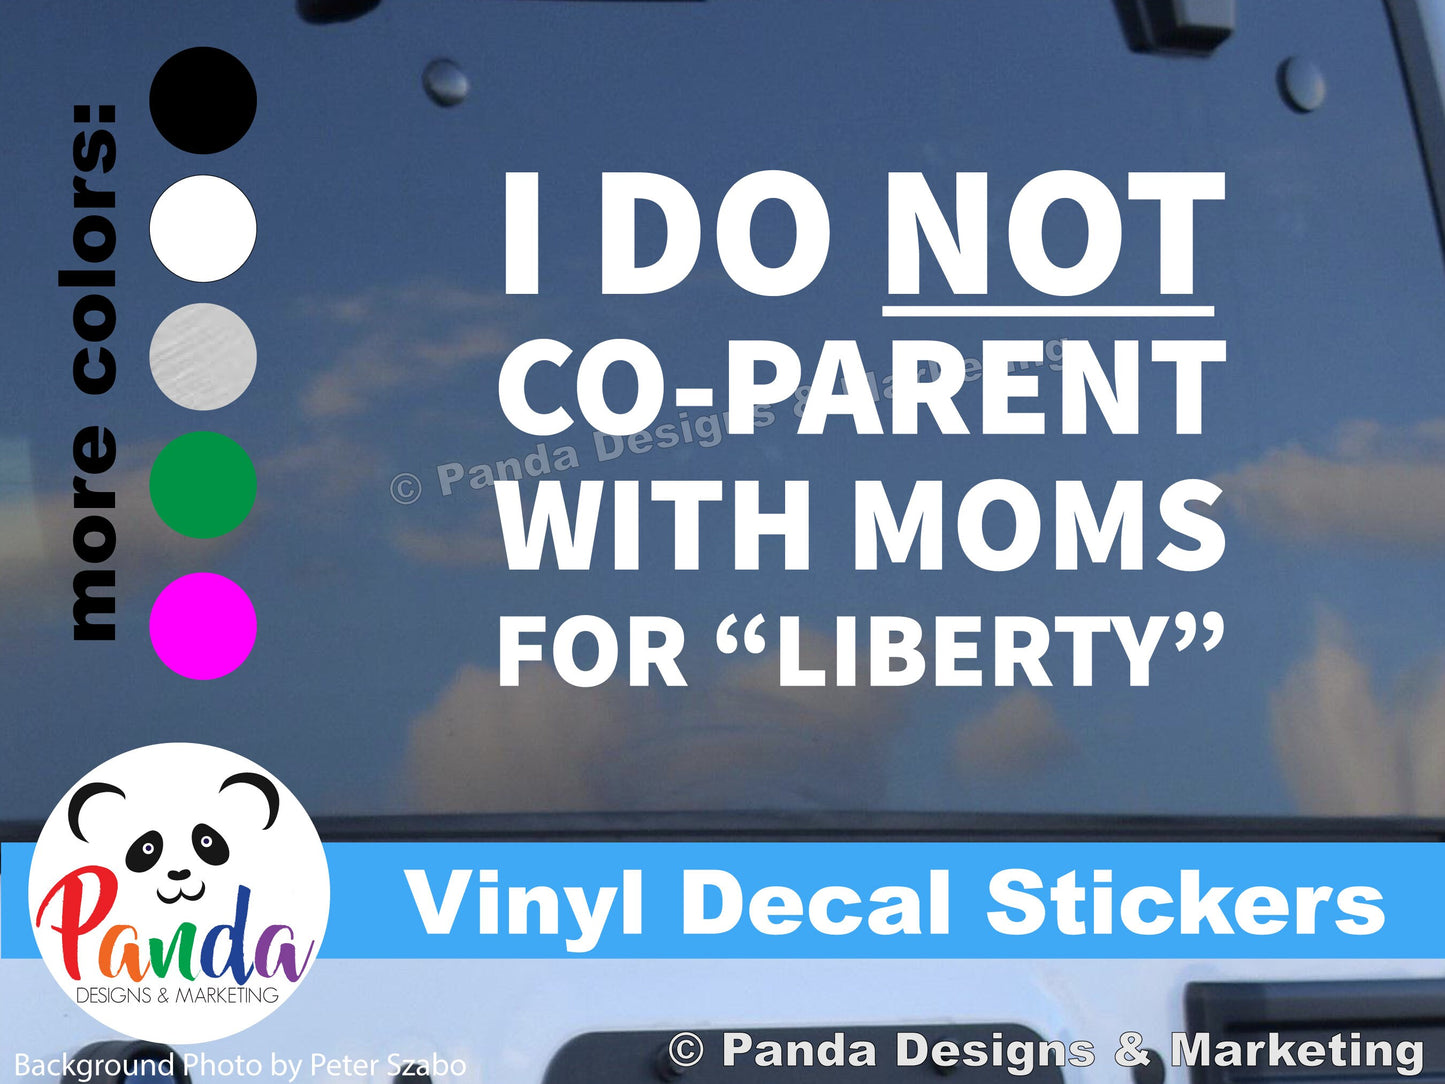 I do NOT Co-Parent with Moms for "Liberty" vinyl decal